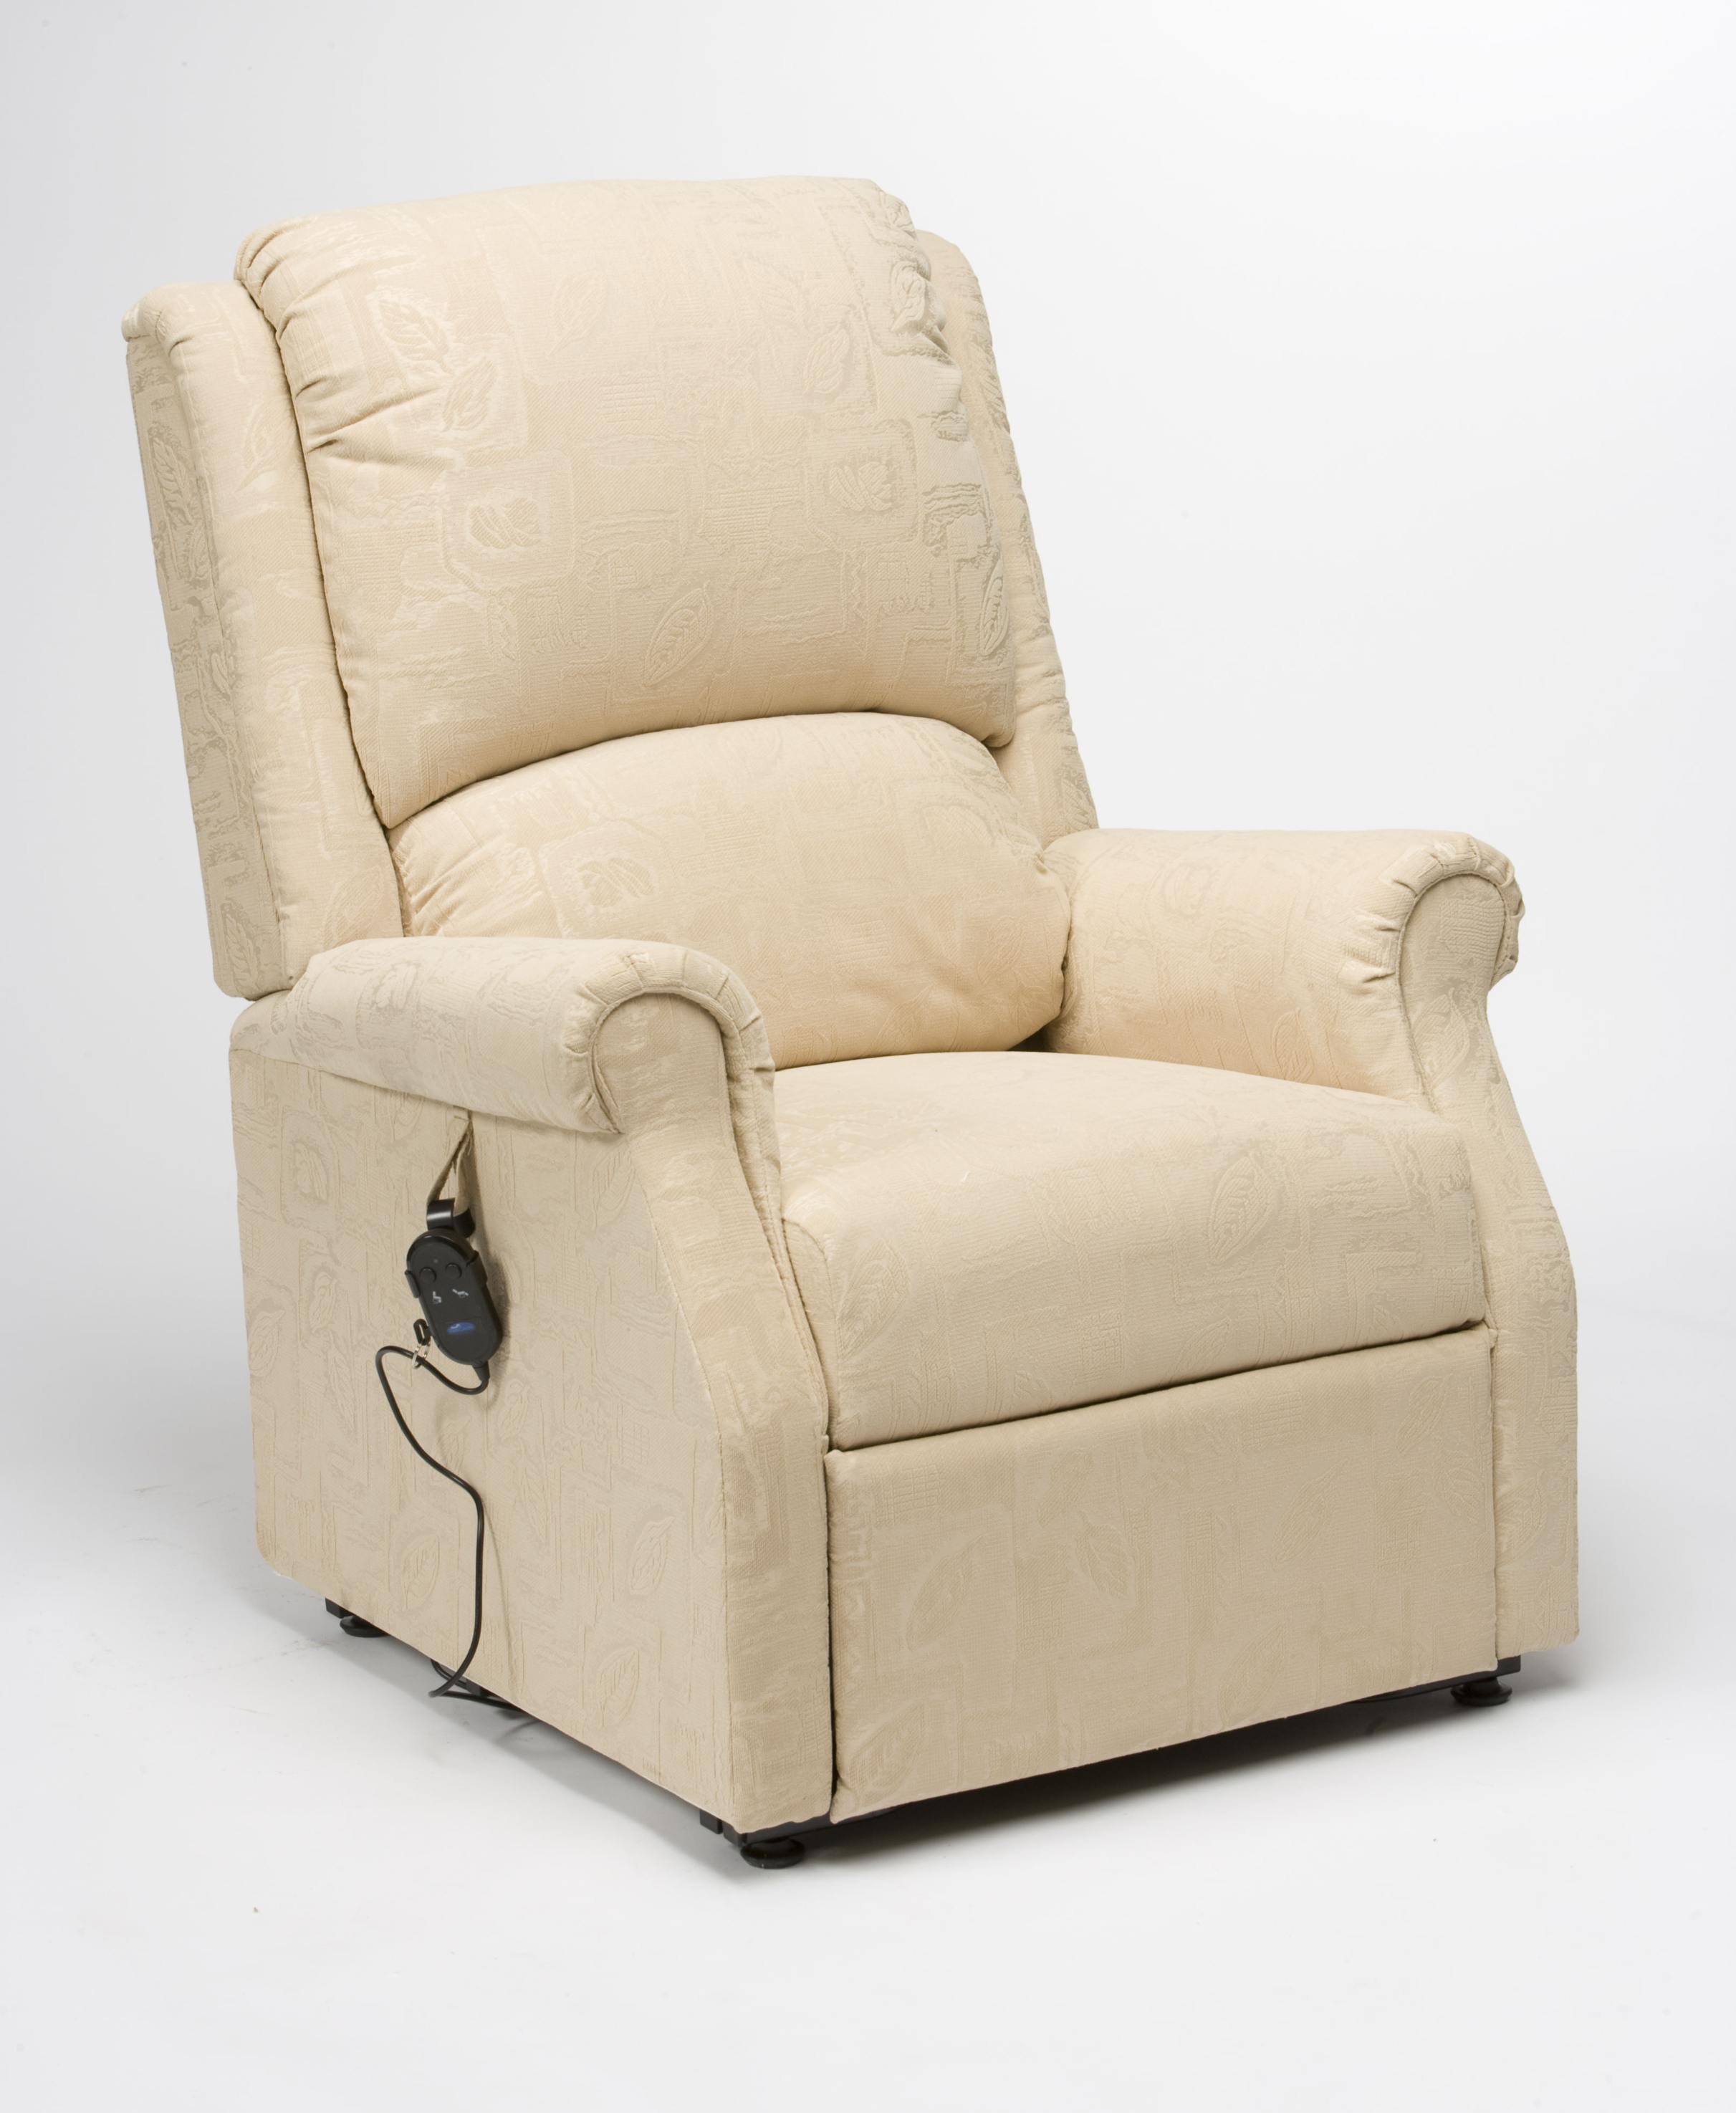 Picture of Chicago Riser Recliner - Beige